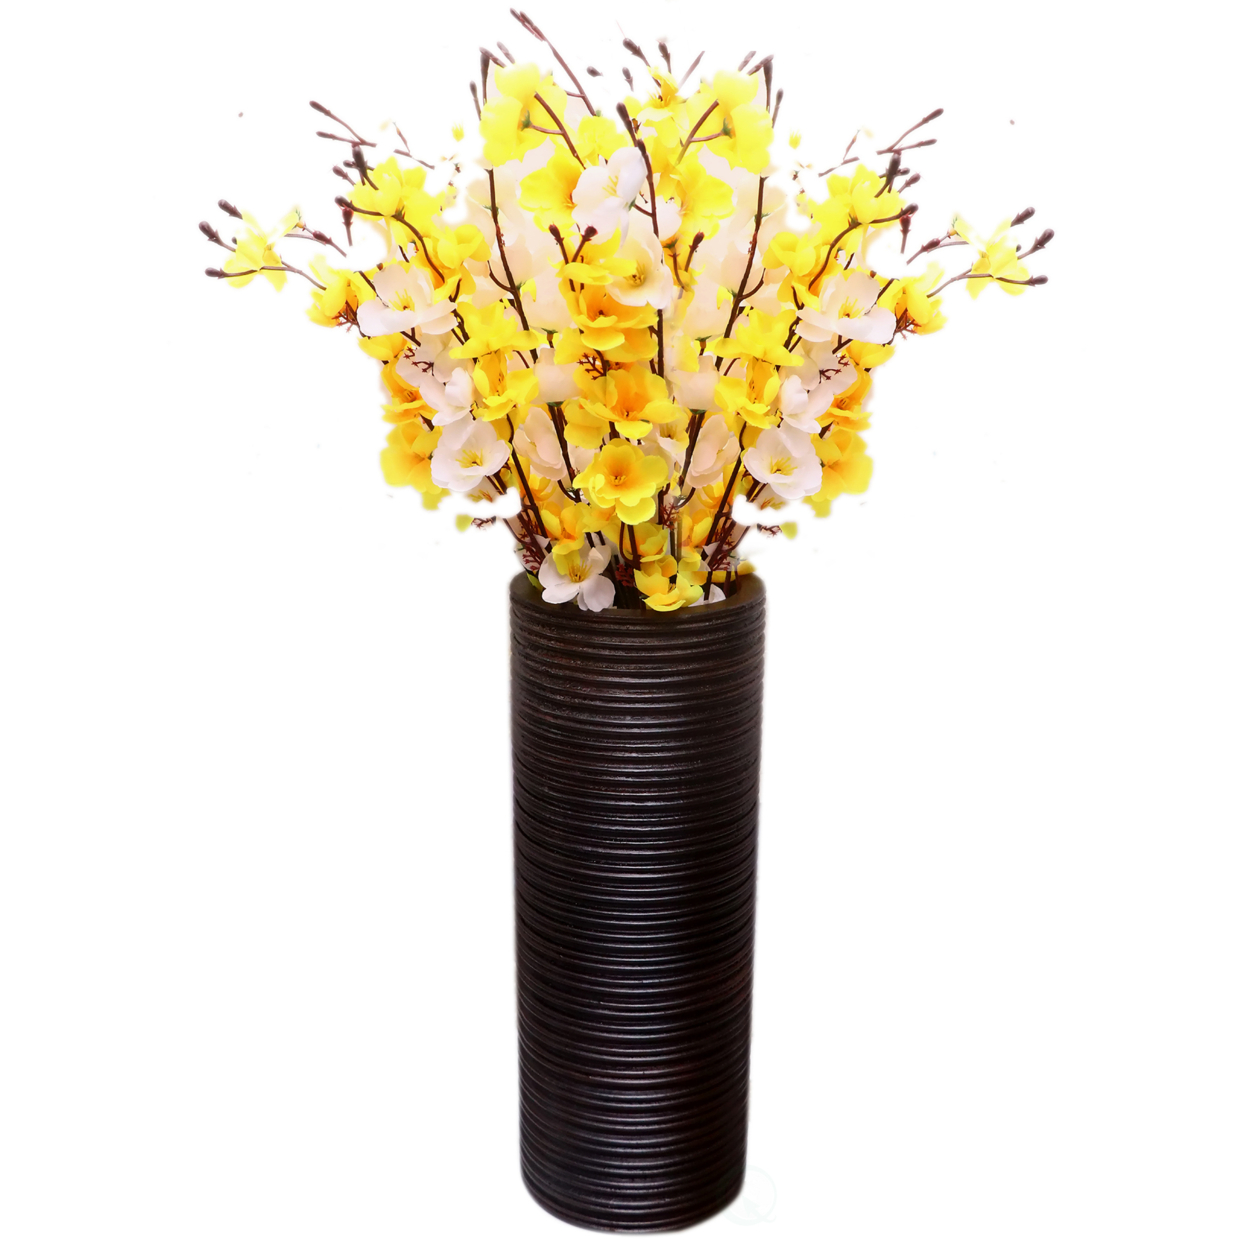 Brown Decorative Contemporary Mango Wood Ribbed Design Cylinder Shaped Vase - Small